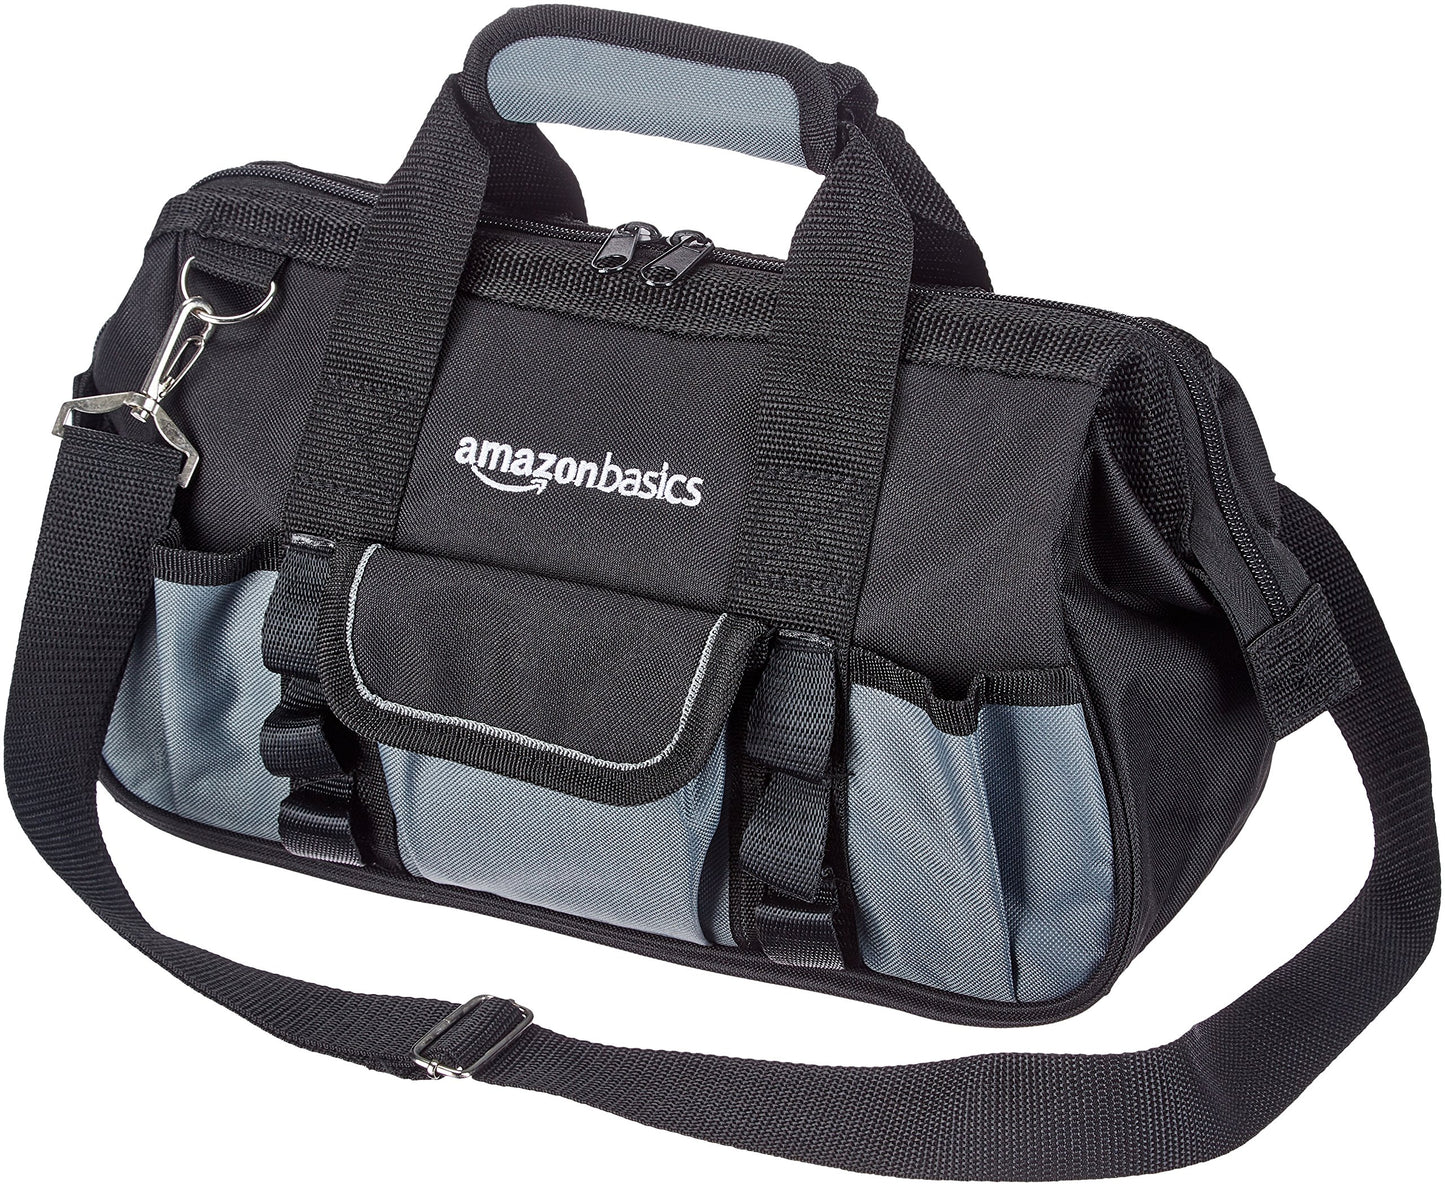 Amazon Basics Durable, Wear-Resistant Base, Tool Bag with Strap, Small (12 Inch)